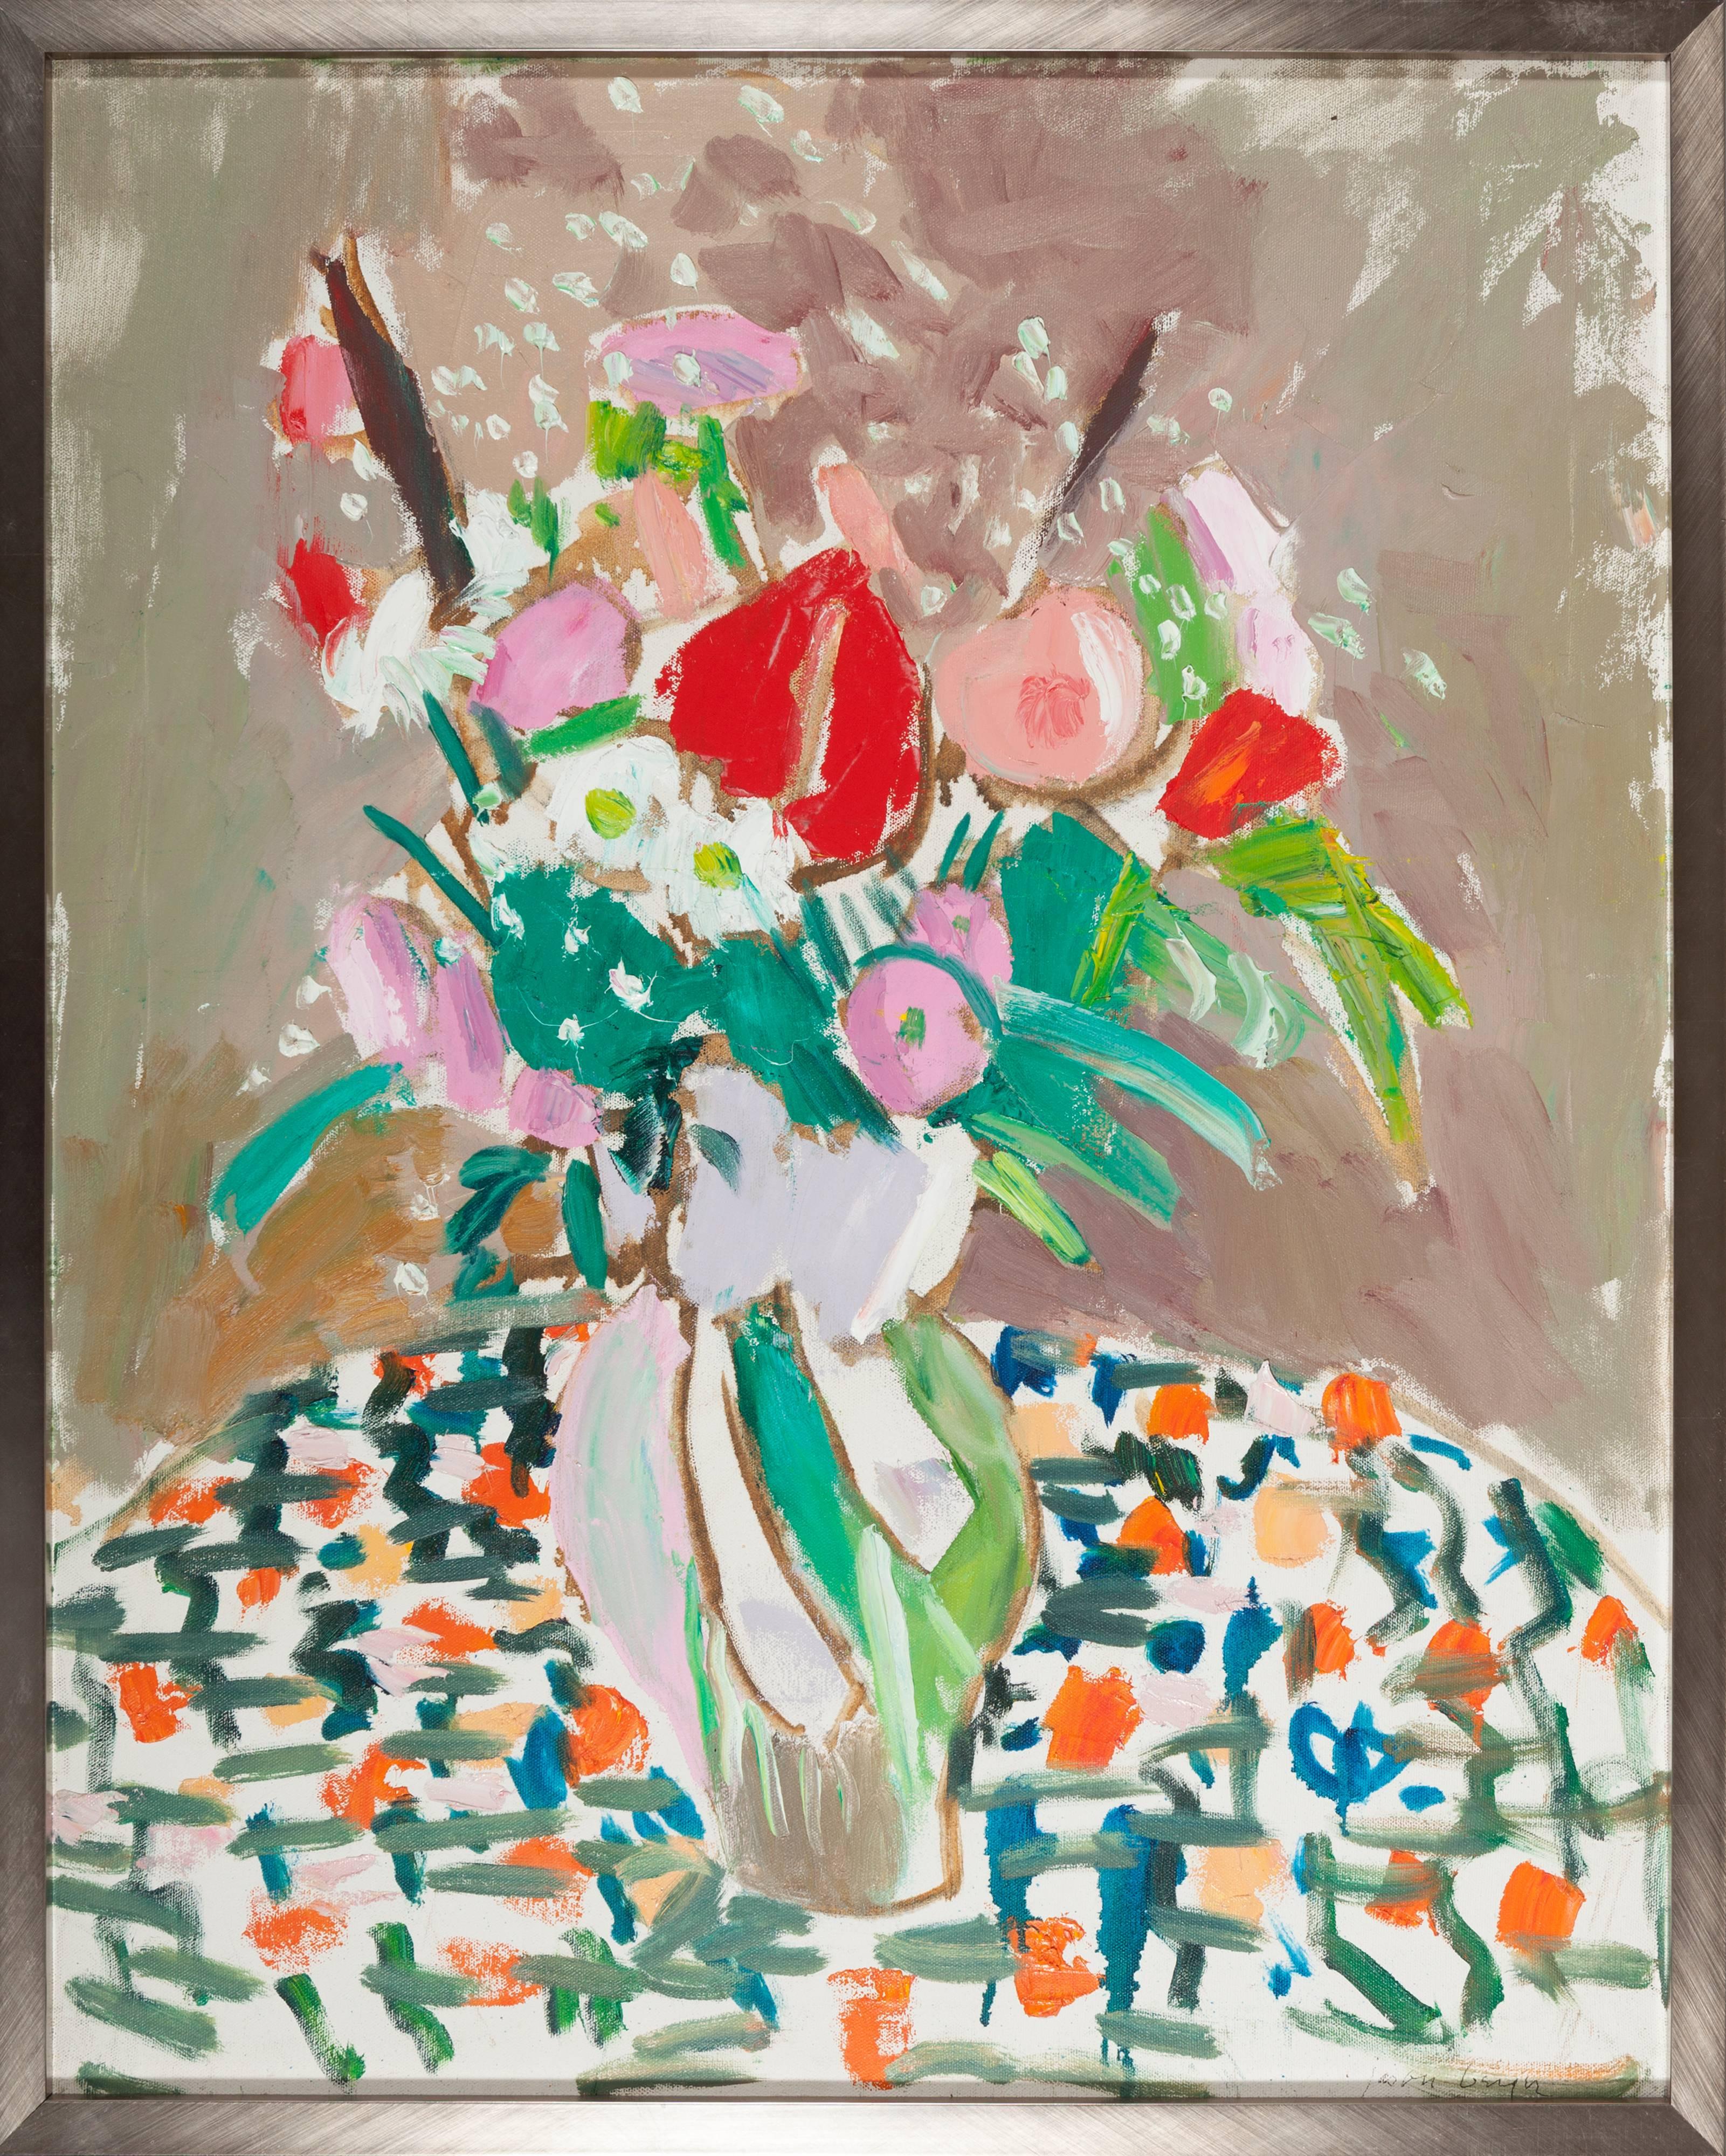 Floral Arrangement, or Spring Flowers - Painting by Jason Berger